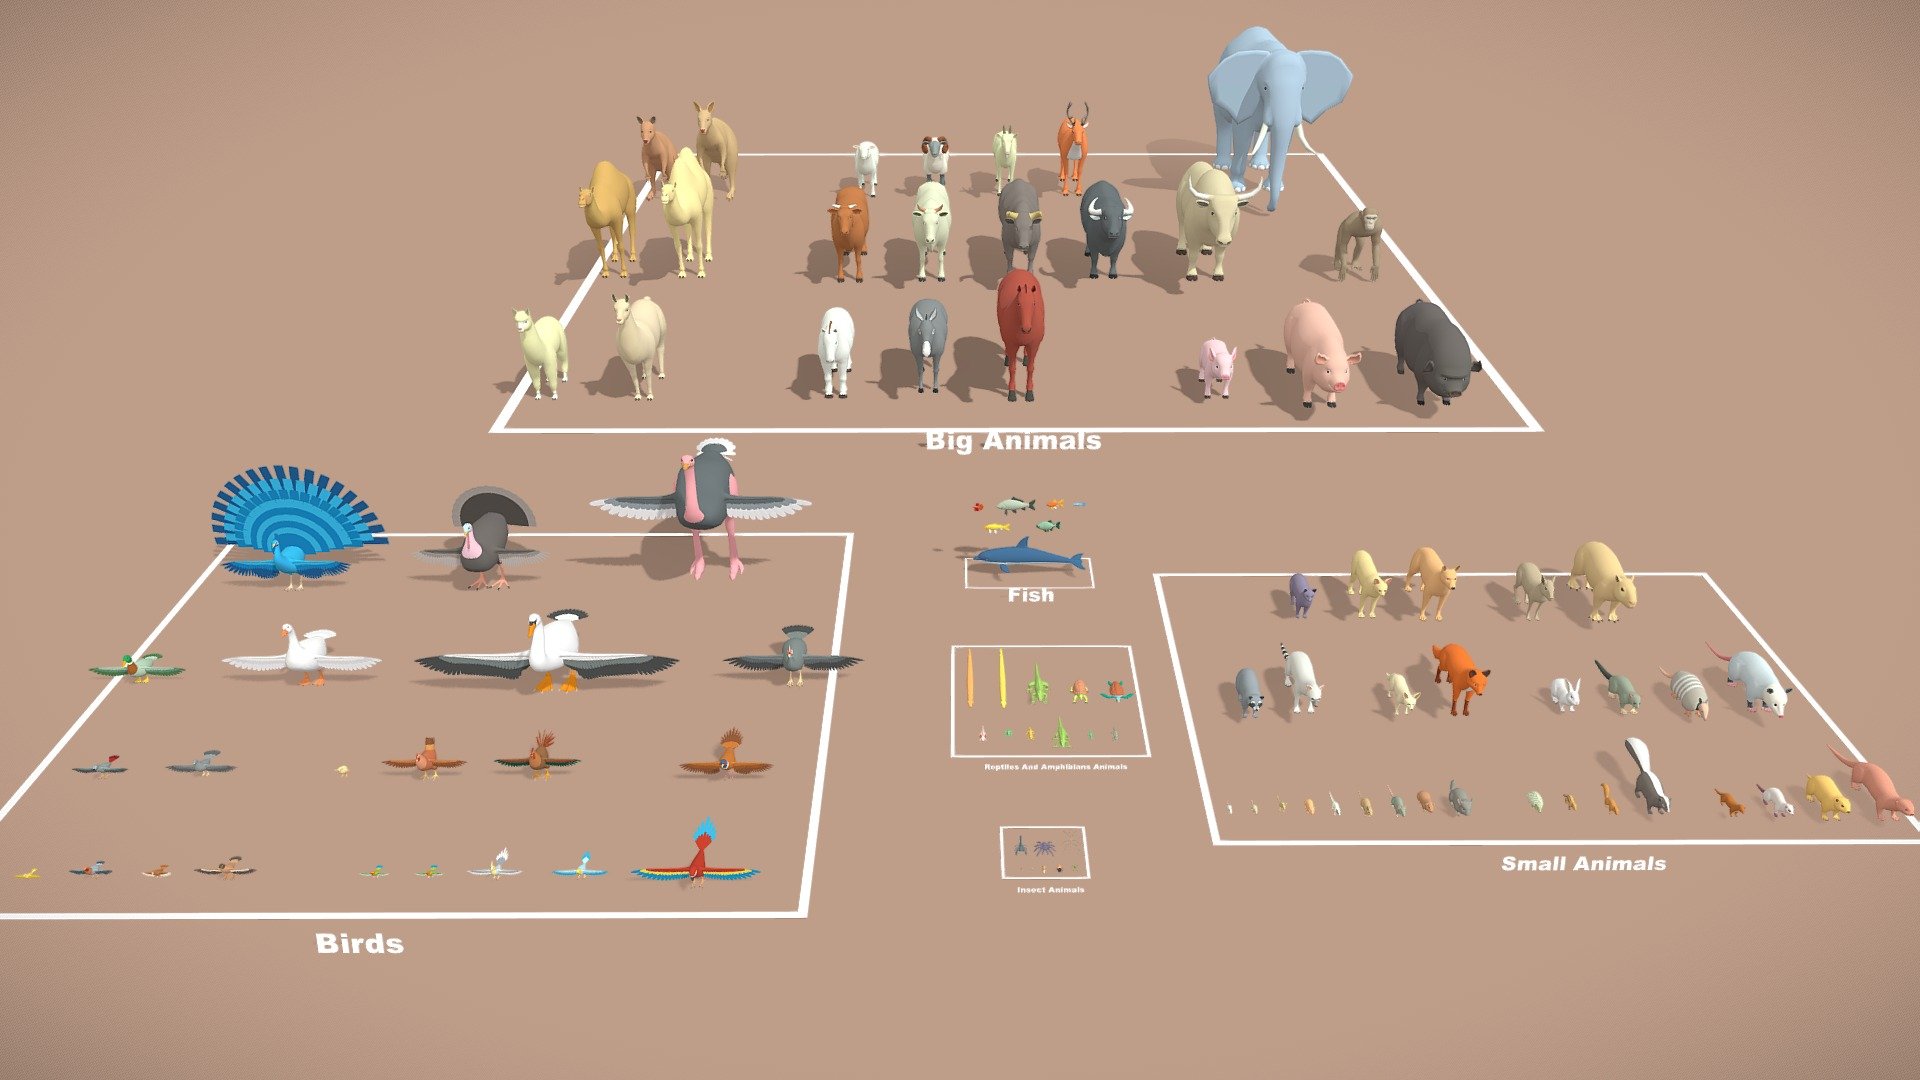 The ultimate collection of most popular domestic animals base meshes is here! The collection is suitable for game projects, cartoons, print models…



Small parts:





Birds lowpoly : https://sketchfab.com/3d-models/birds-lowpoly-animals-pack-e5cfa9f042f44ffaa6ddc6e39a24d03e

Small Animals lowpoly: https://sketchfab.com/3d-models/small-animals-lowpoly-animals-pack-afade60c9bc148a59fbc7186ca860276

Big Animals lowpoly: https://sketchfab.com/3d-models/big-animals-lowpoly-animals-pack-af3f9a4d90104353b9f93920bf9584b9

Reptiles, Amphibians lowpoly: https://sketchfab.com/3d-models/reptiles-amphibians-lowpoly-animals-pack-5ae0099cf8d04b07abd13b9e4b97ed4e

Insect lowpoly: https://sketchfab.com/3d-models/insect-lowpoly-animals-pack-928928b5bd4f492d914b8bcbe0394662

Fish lowpoly: https://sketchfab.com/3d-models/fish-lowpoly-animals-pack-6b83a0562b624465bd9cf54491323f52


Buy large collections to save more than buying small


Contact me for support. Hope to receive feedback from everyone. Thanks
 - Animal Collection Lowpoly - Pack 100+ Assets - Buy Royalty Free 3D model by DuNguyn - Assets store (@nguyenvuduc2000) 3d model